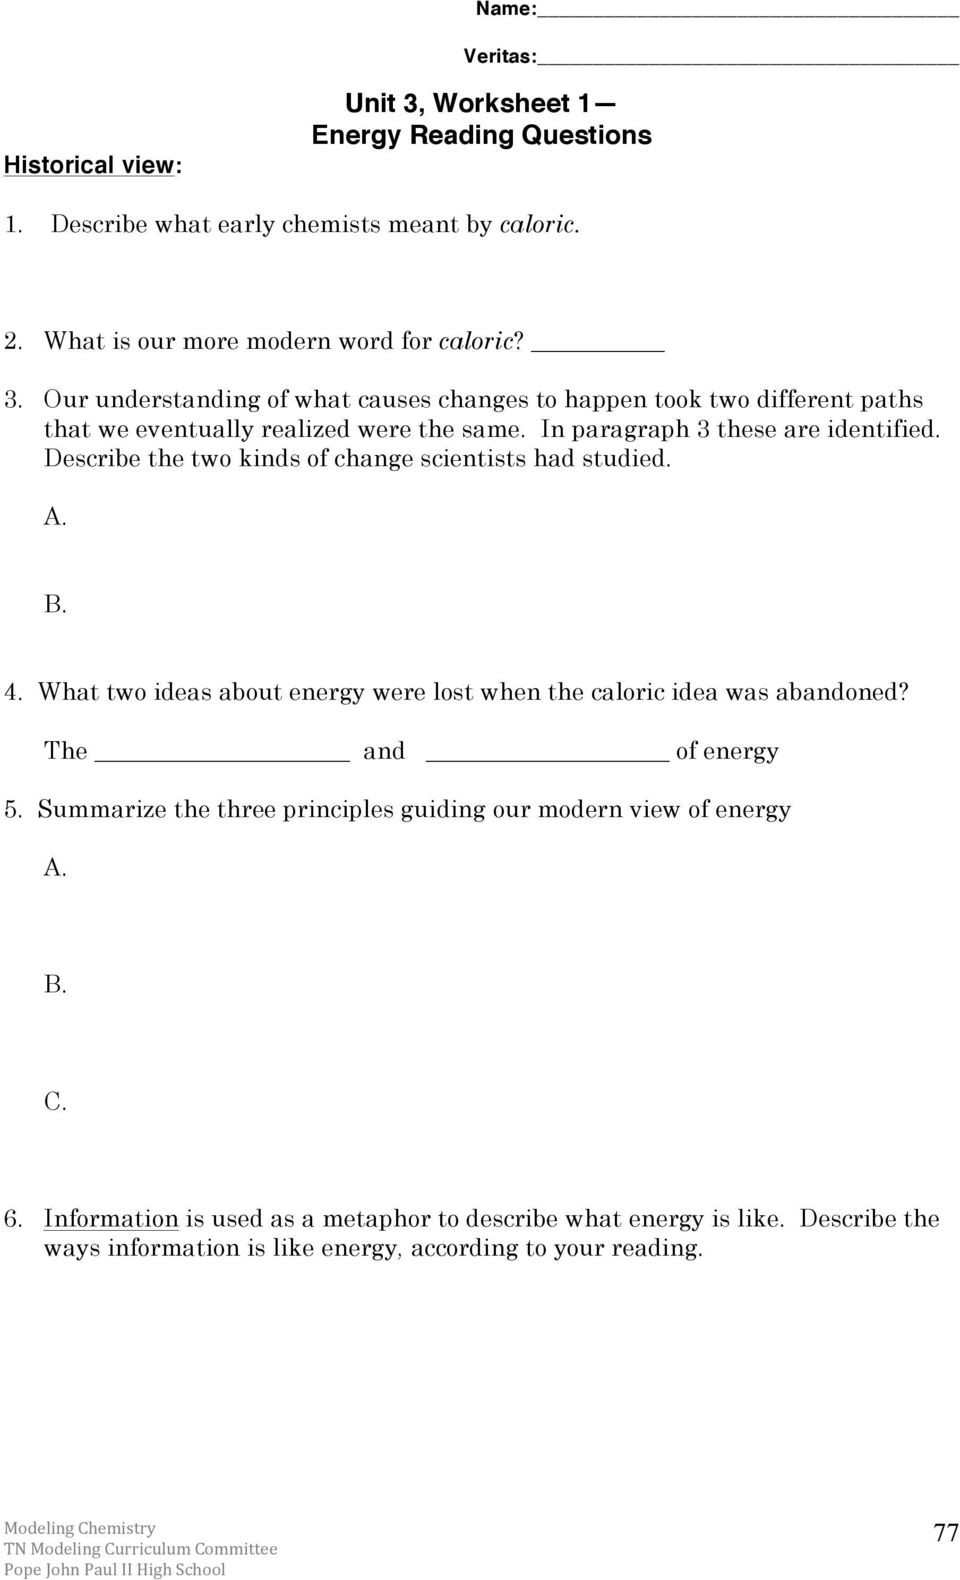 Kinetic Molecular theory Worksheet Chemistry Unit 3 Reading assignment Energy and Kinetic